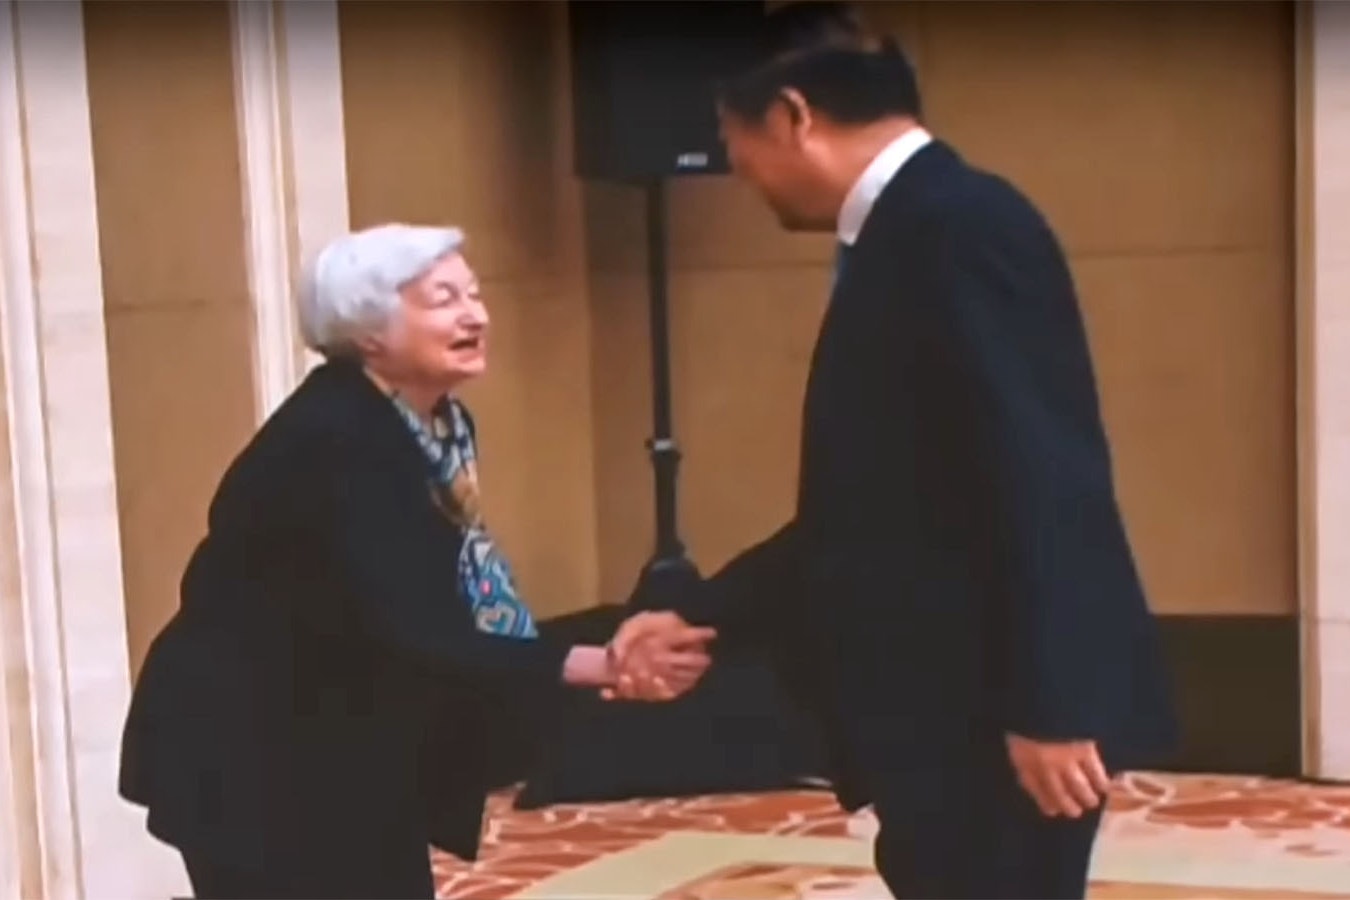 U.S. Secretary of Treasury Janet Yellen bowed several times fast when meeting a Chinese government official.